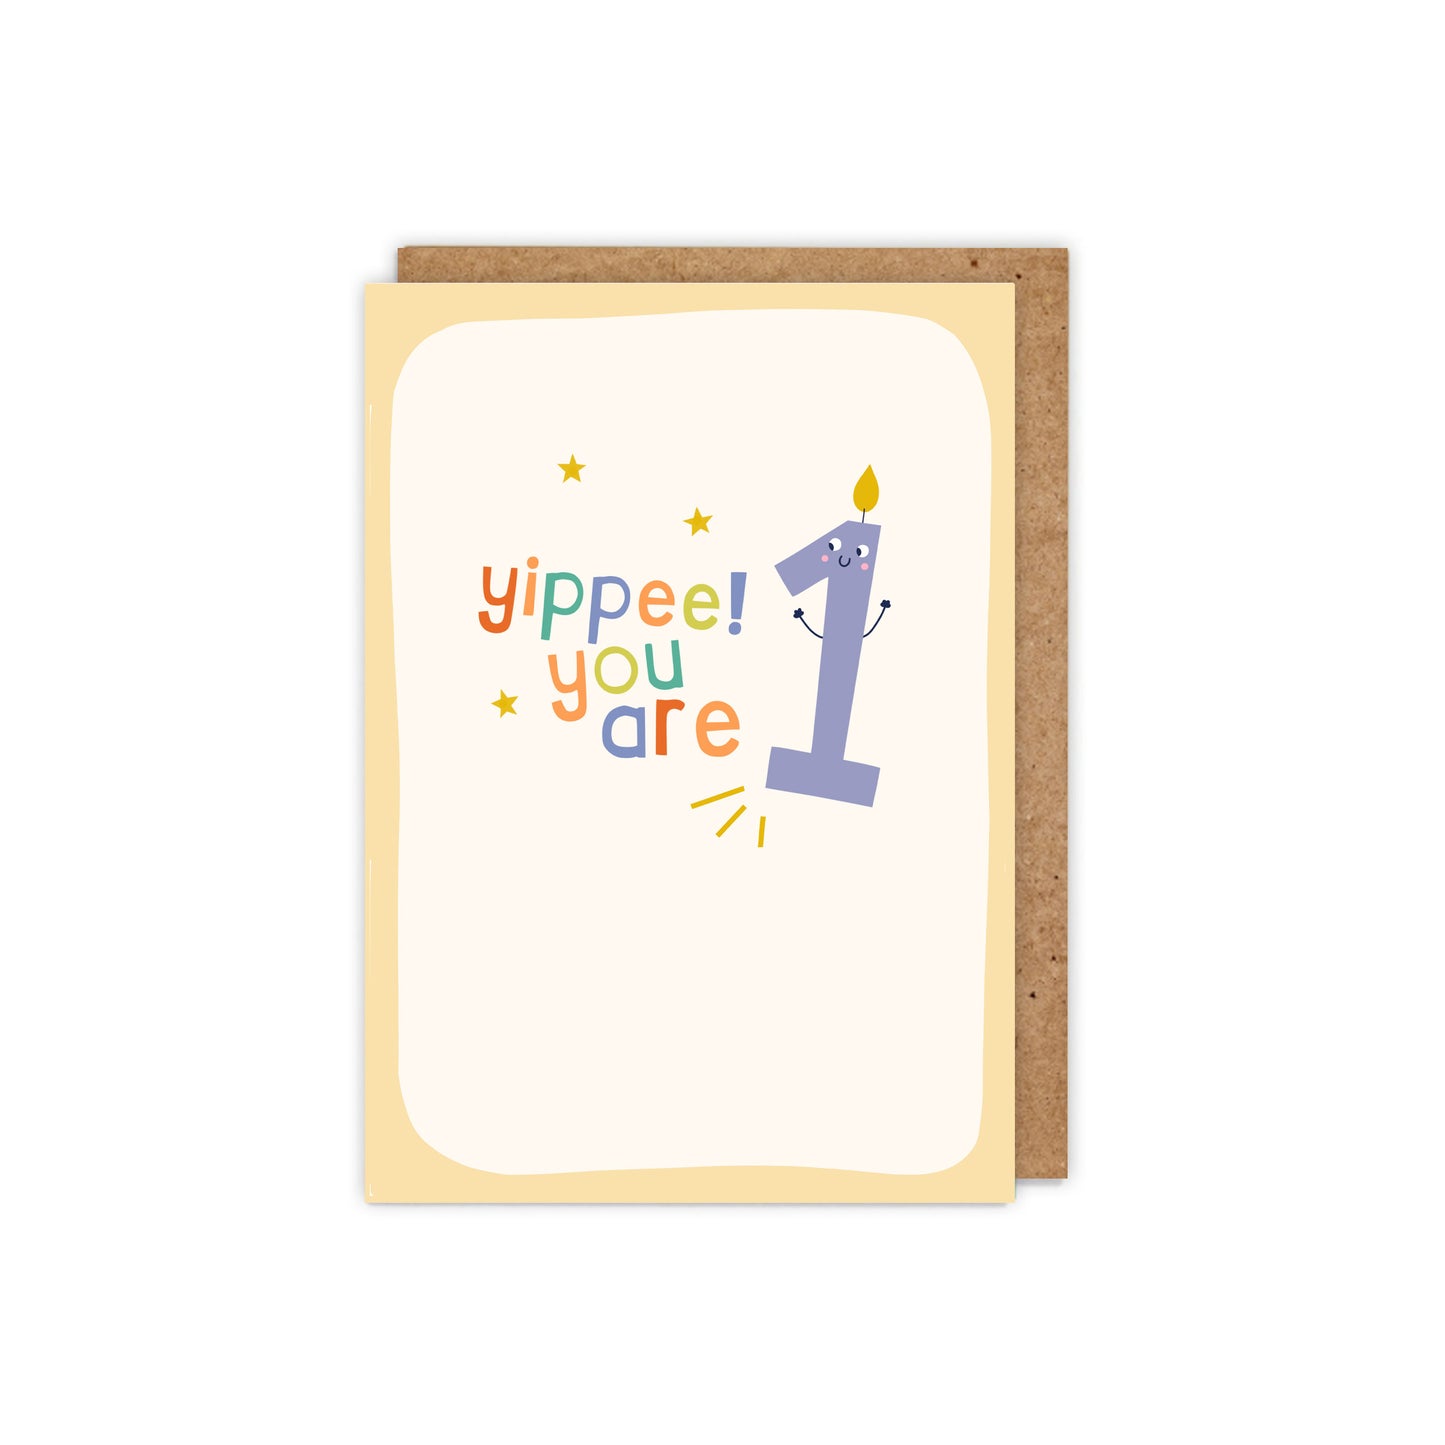 Yippee! You are 1! 1nd Birthday Card